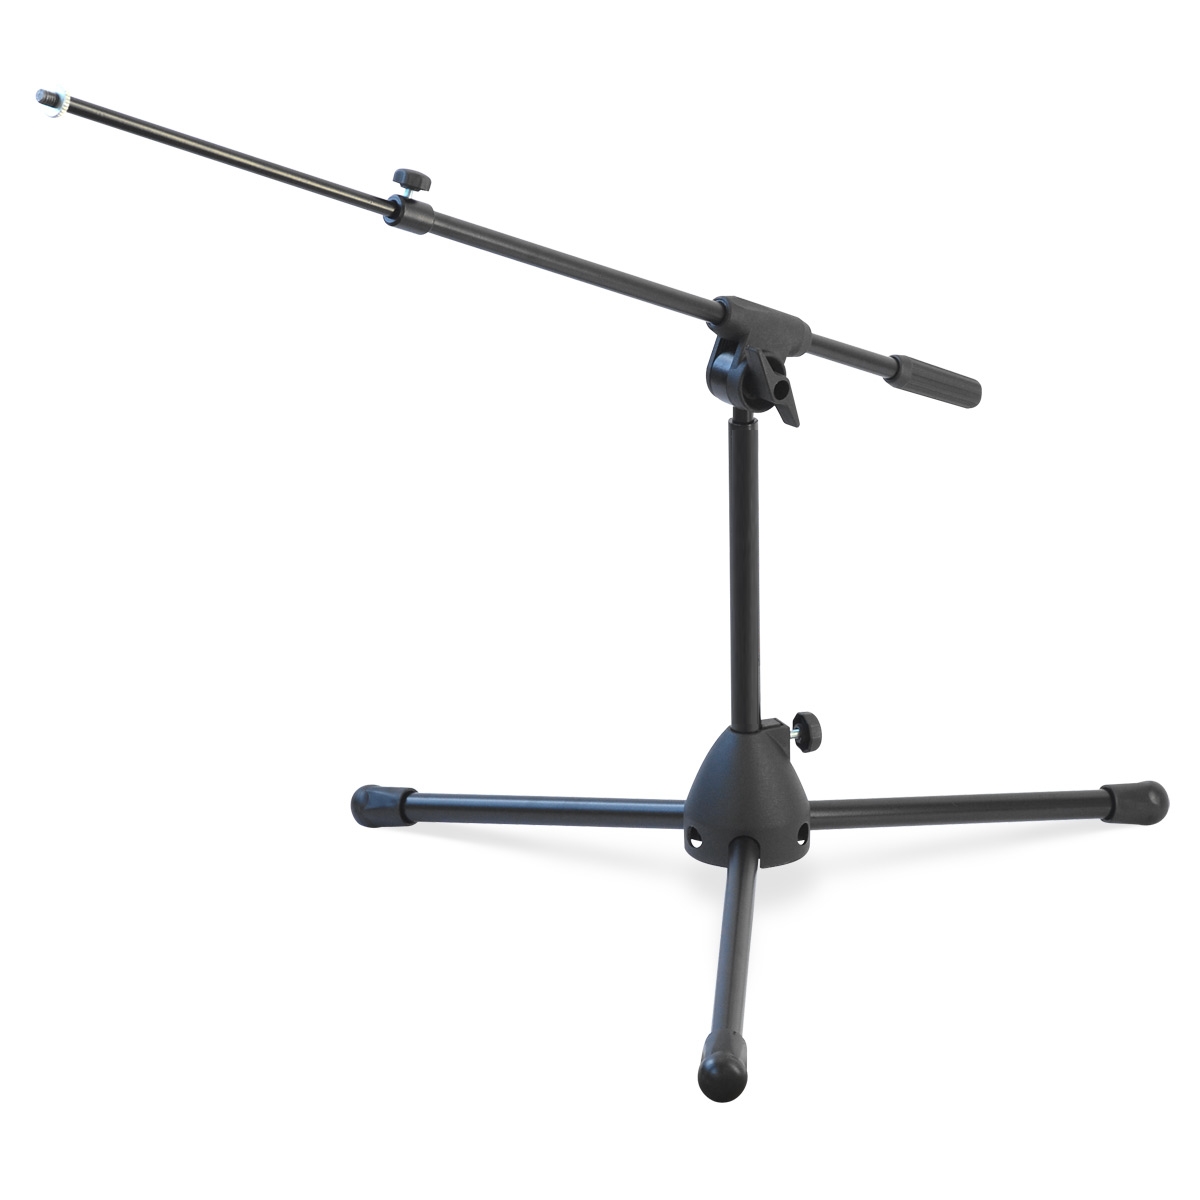 Be On Stage - PM-TG-Small1 - Small microphone stand